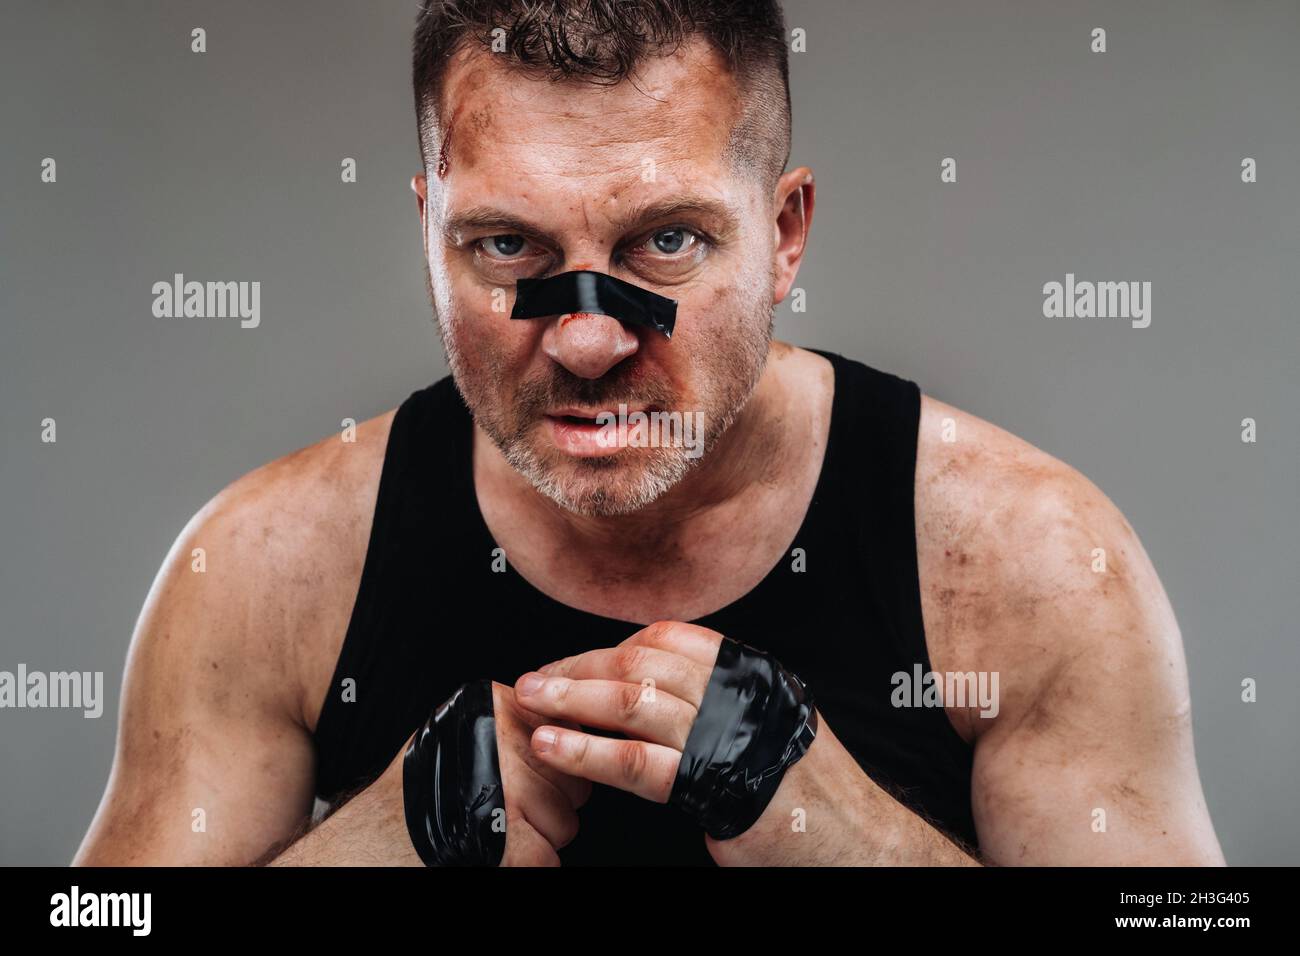 on a gray background stands a battered man in a black T shirt looking like a fighter and preparing for a fight. Stock Photo